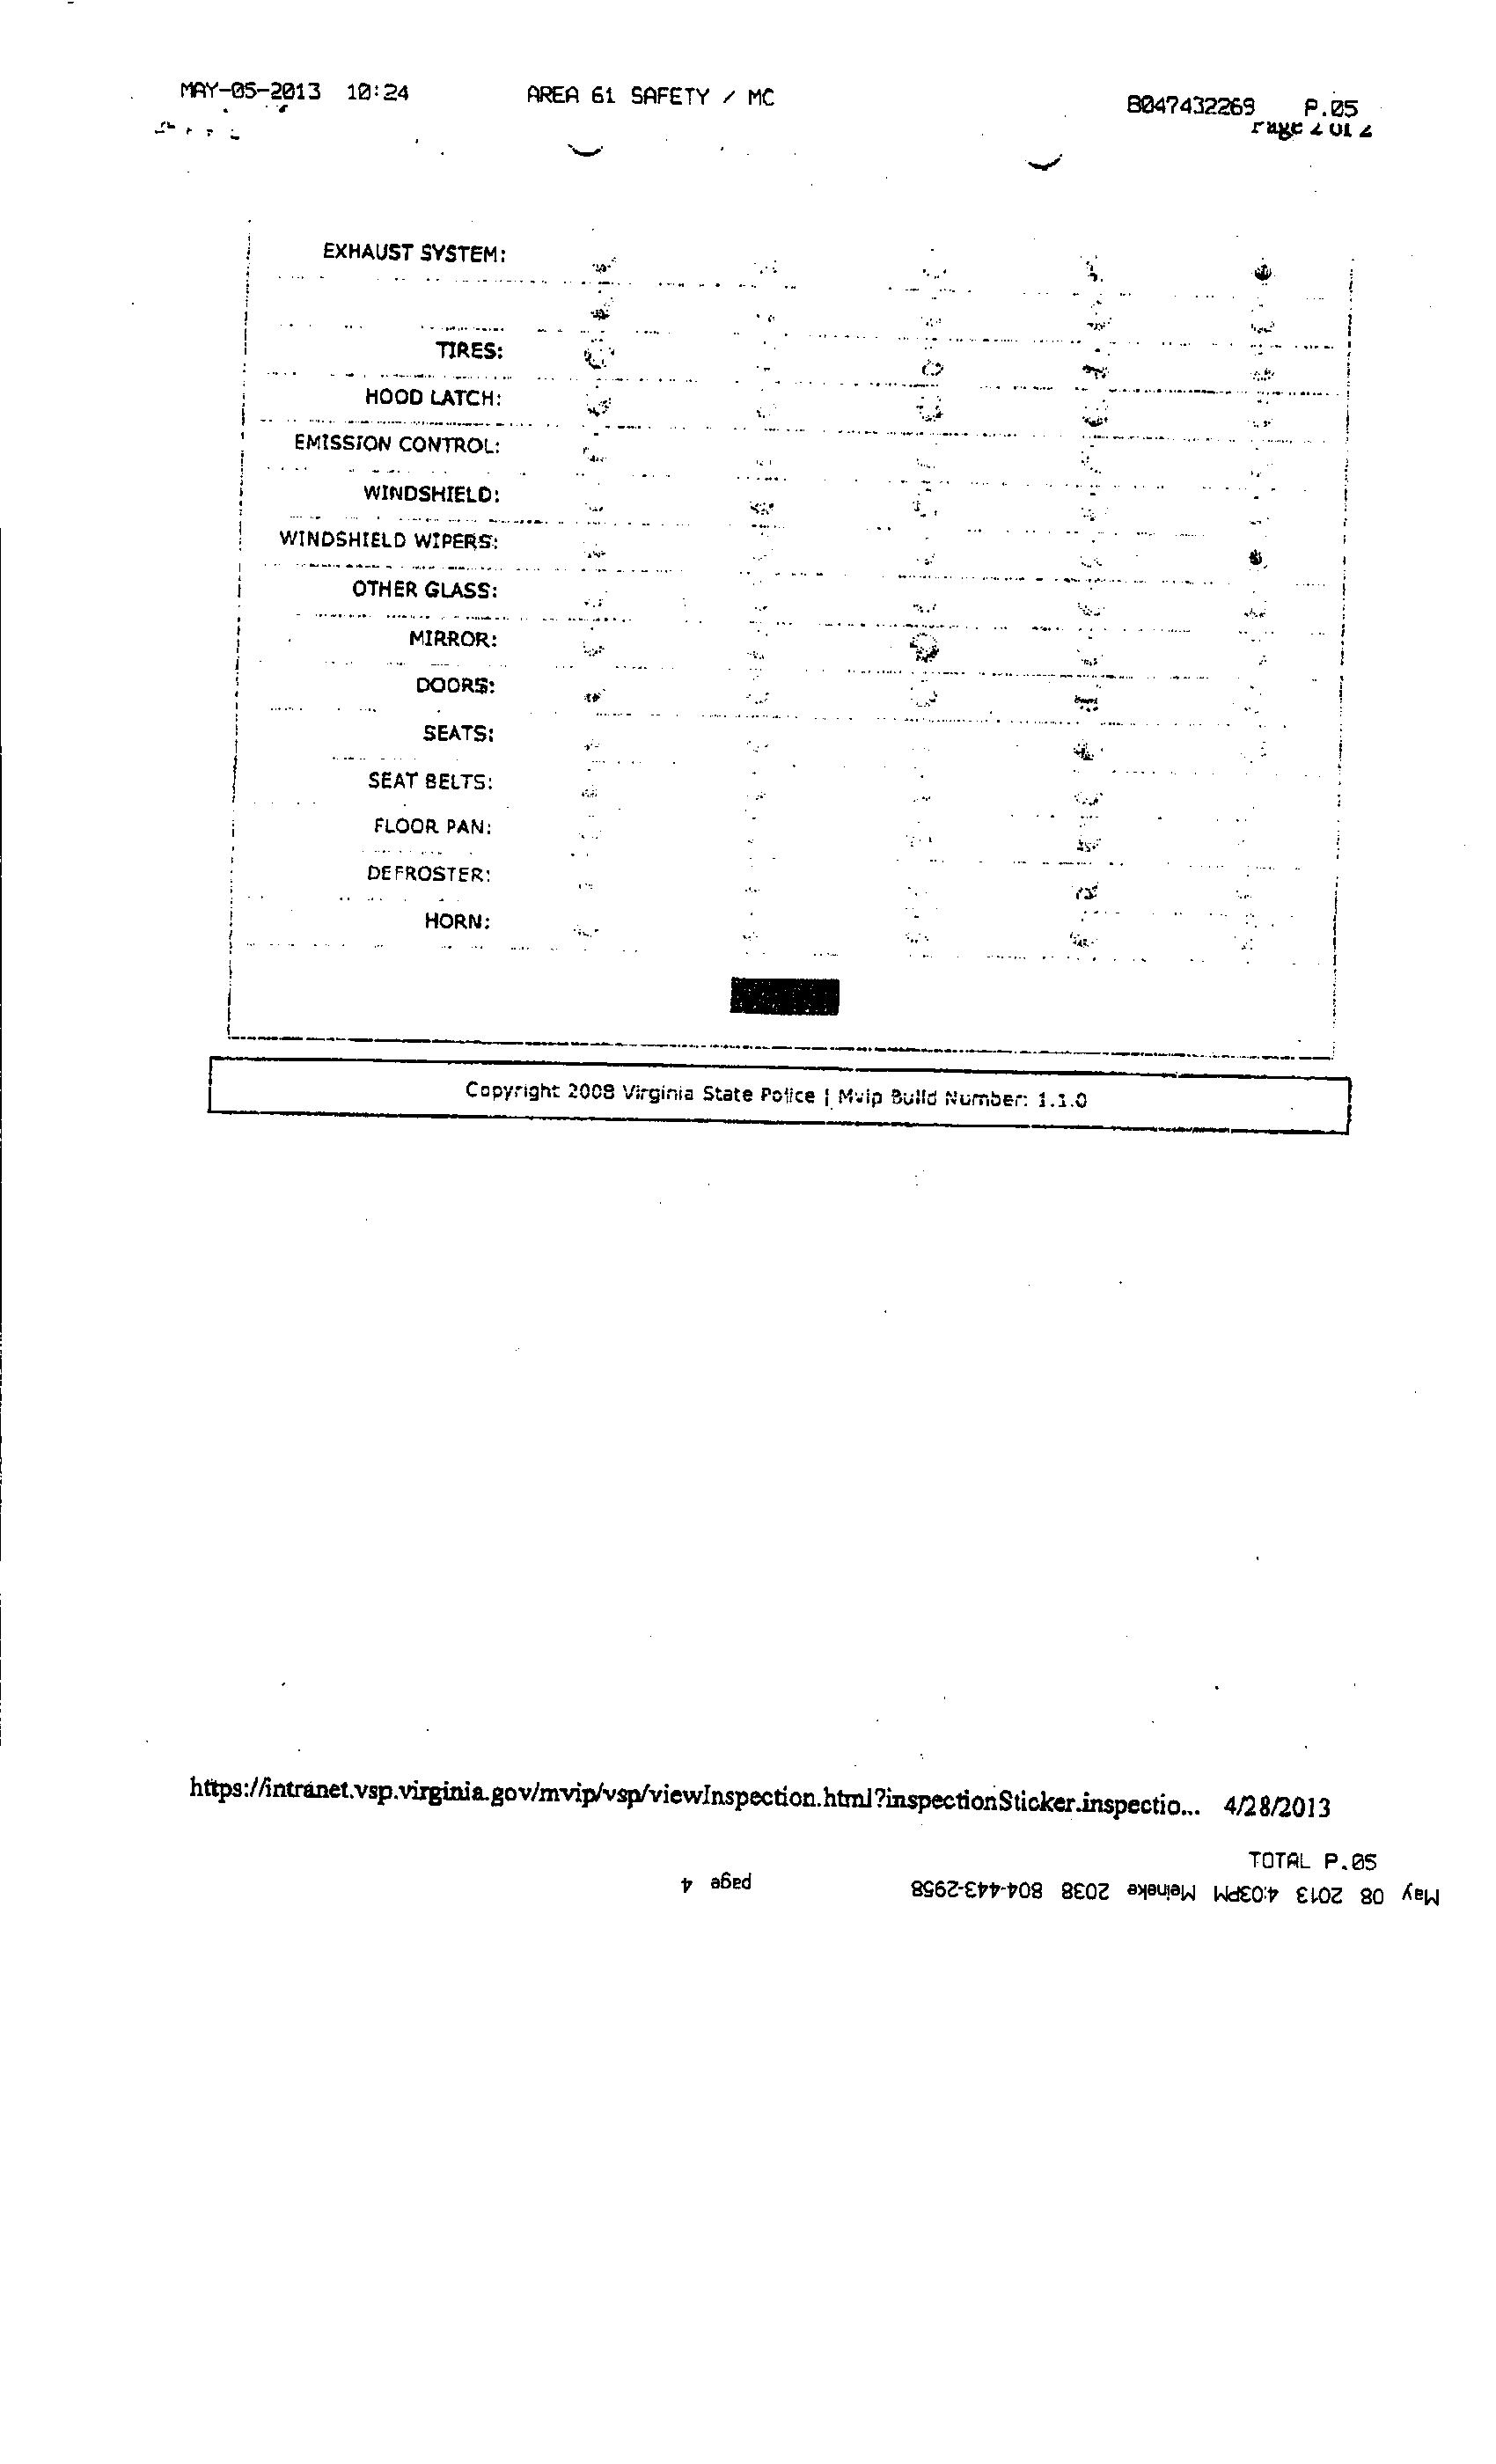 Inspection Report Page 3